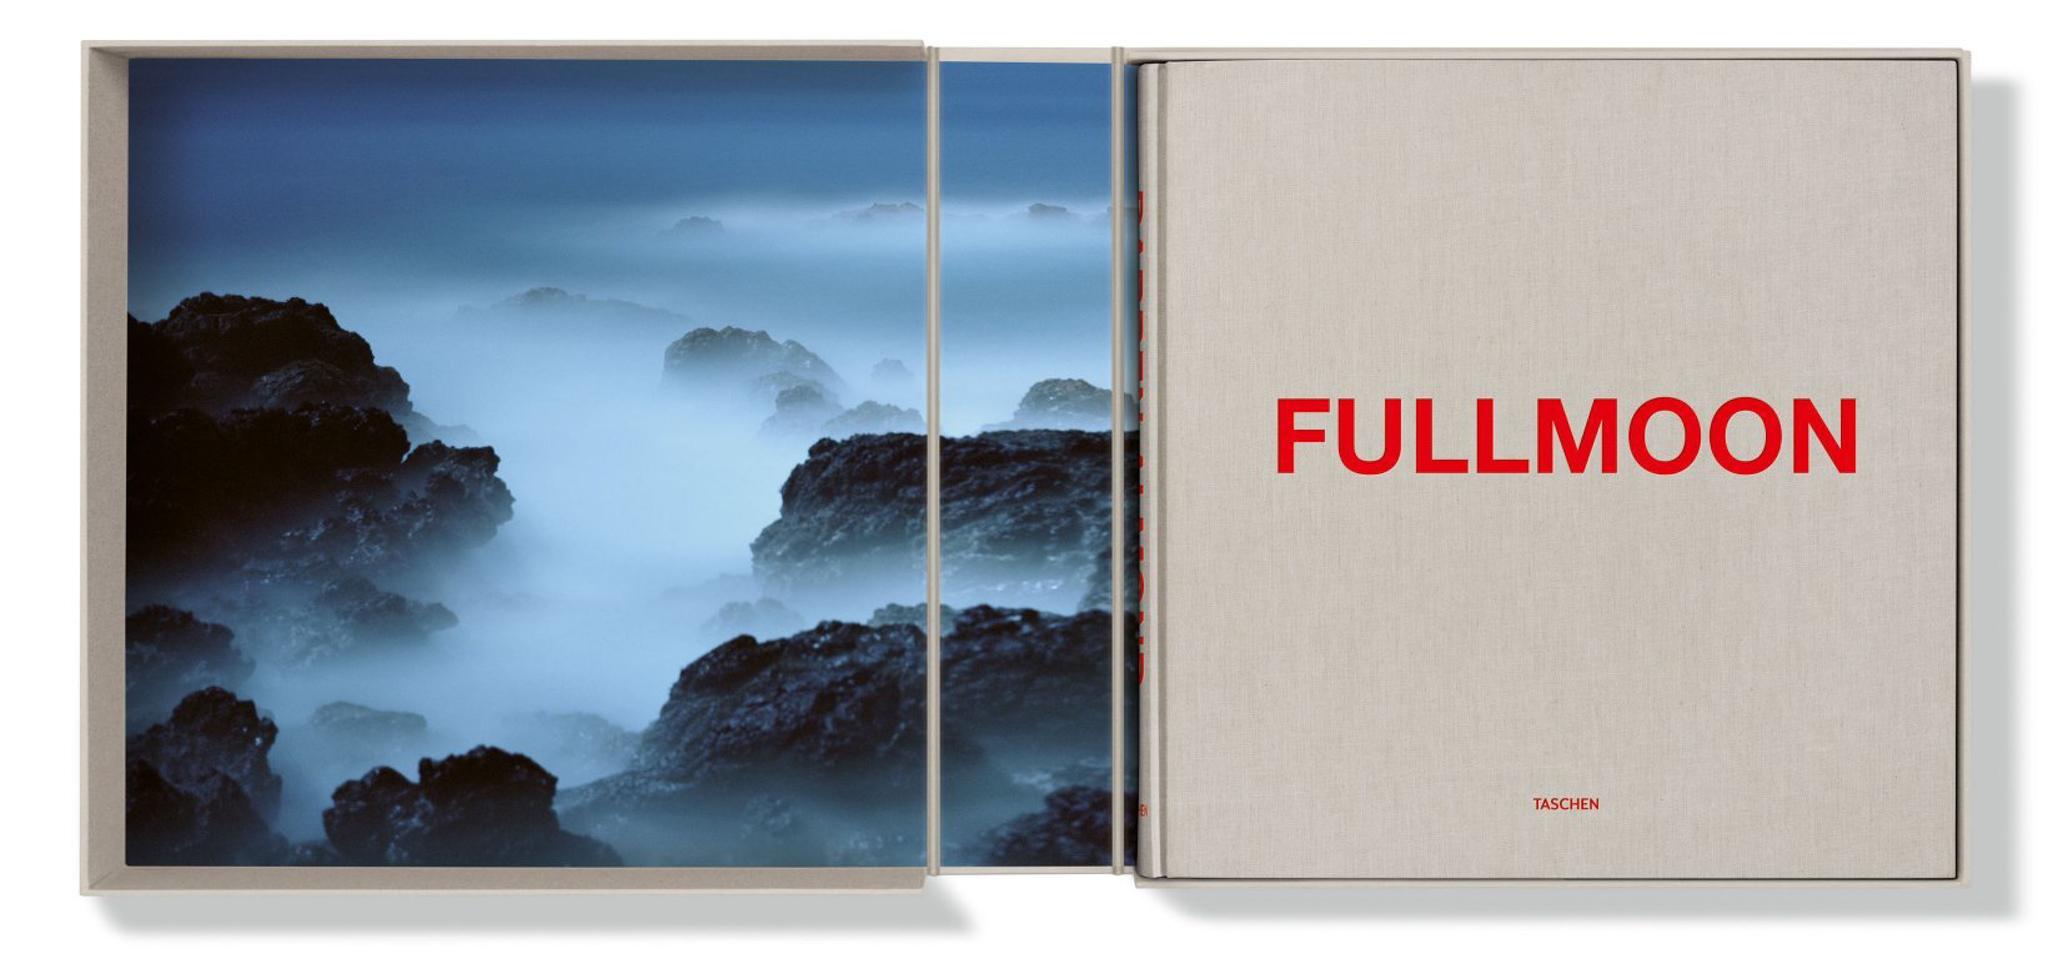 Fullmoon - Limited TASCHEN Art Edition with Hand-Signed C-Print - New - Photograph by Darren Almond